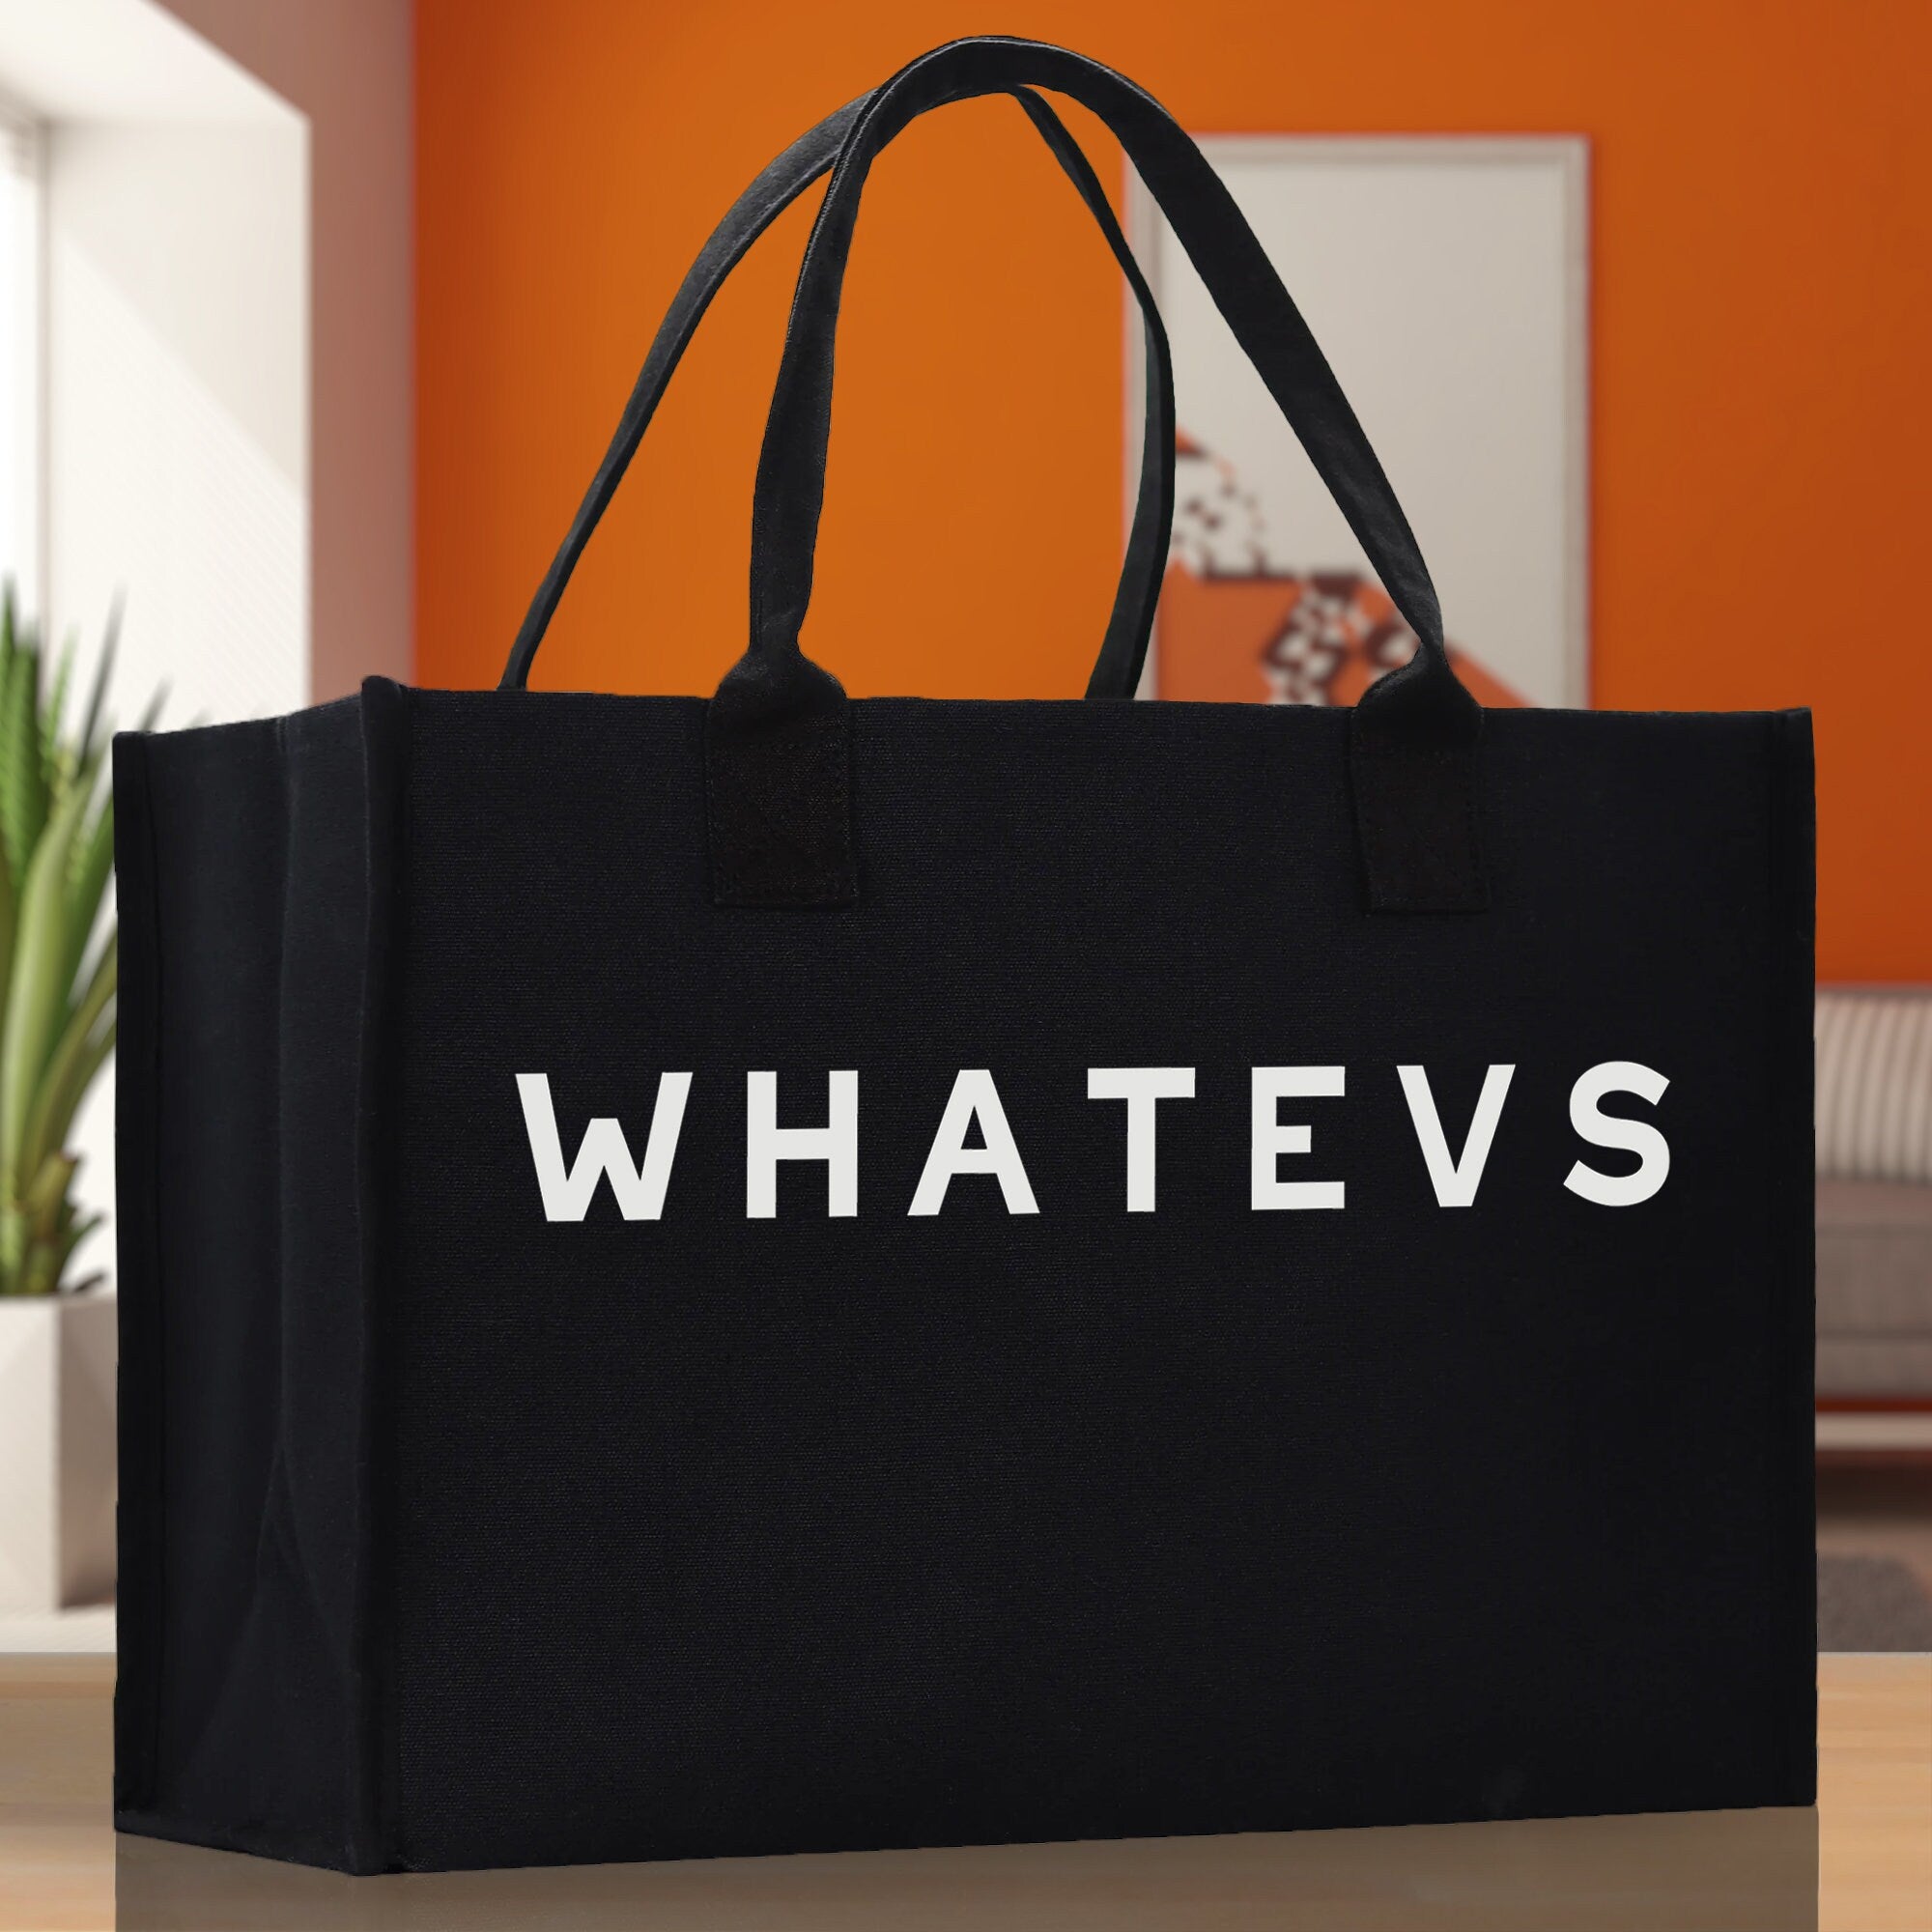 Whatevs Cotton Canvas Chic Beach Tote Bag Multipurpose Tote Weekender Tote Gift for Her Outdoor Tote Vacation Tote Large Beach Bag